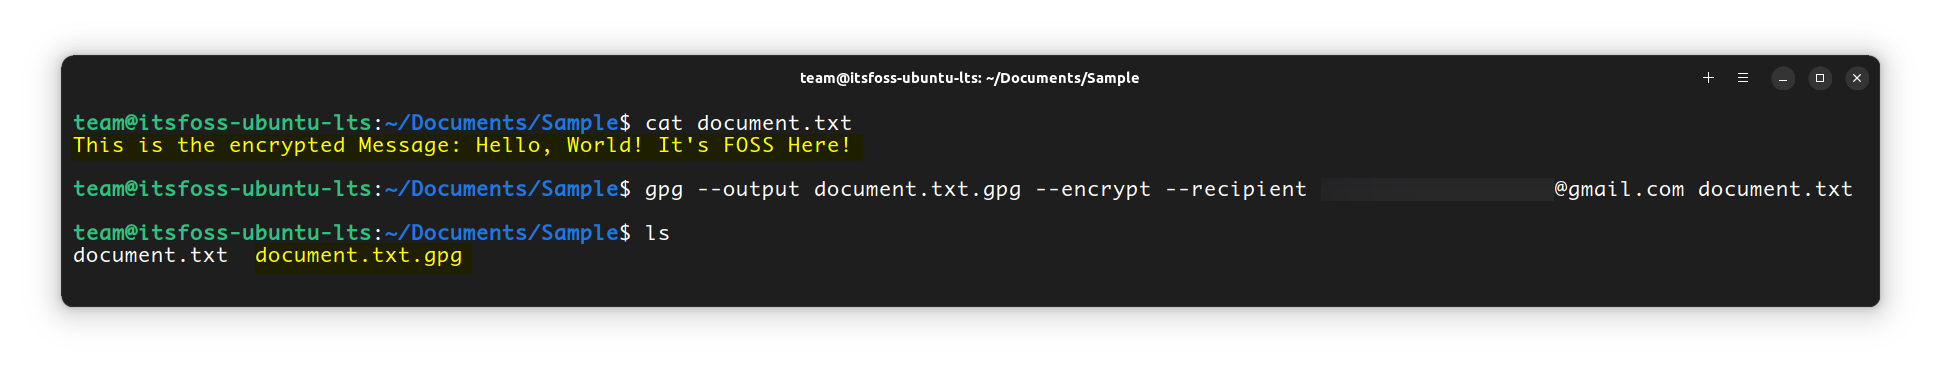 Encrypting the Document on the Sender’s end